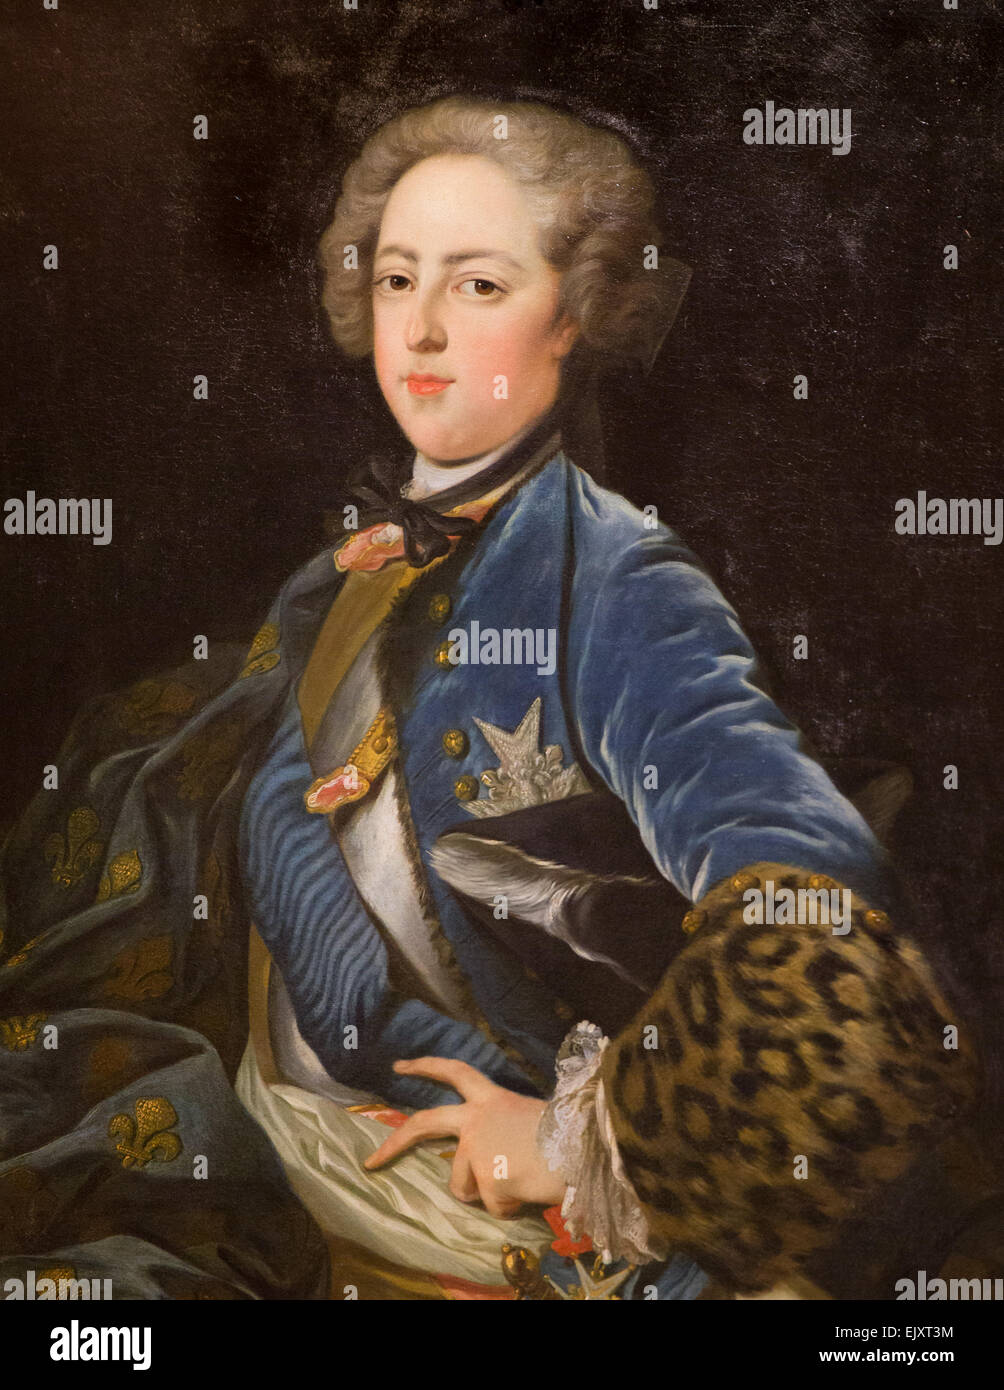 ActiveMuseum 0005734.jpg / Louis XV, King of France. Commanded by the direction of the royal buildings 05/12/2013  -   / 18th century Collection / Active Museum Stock Photo